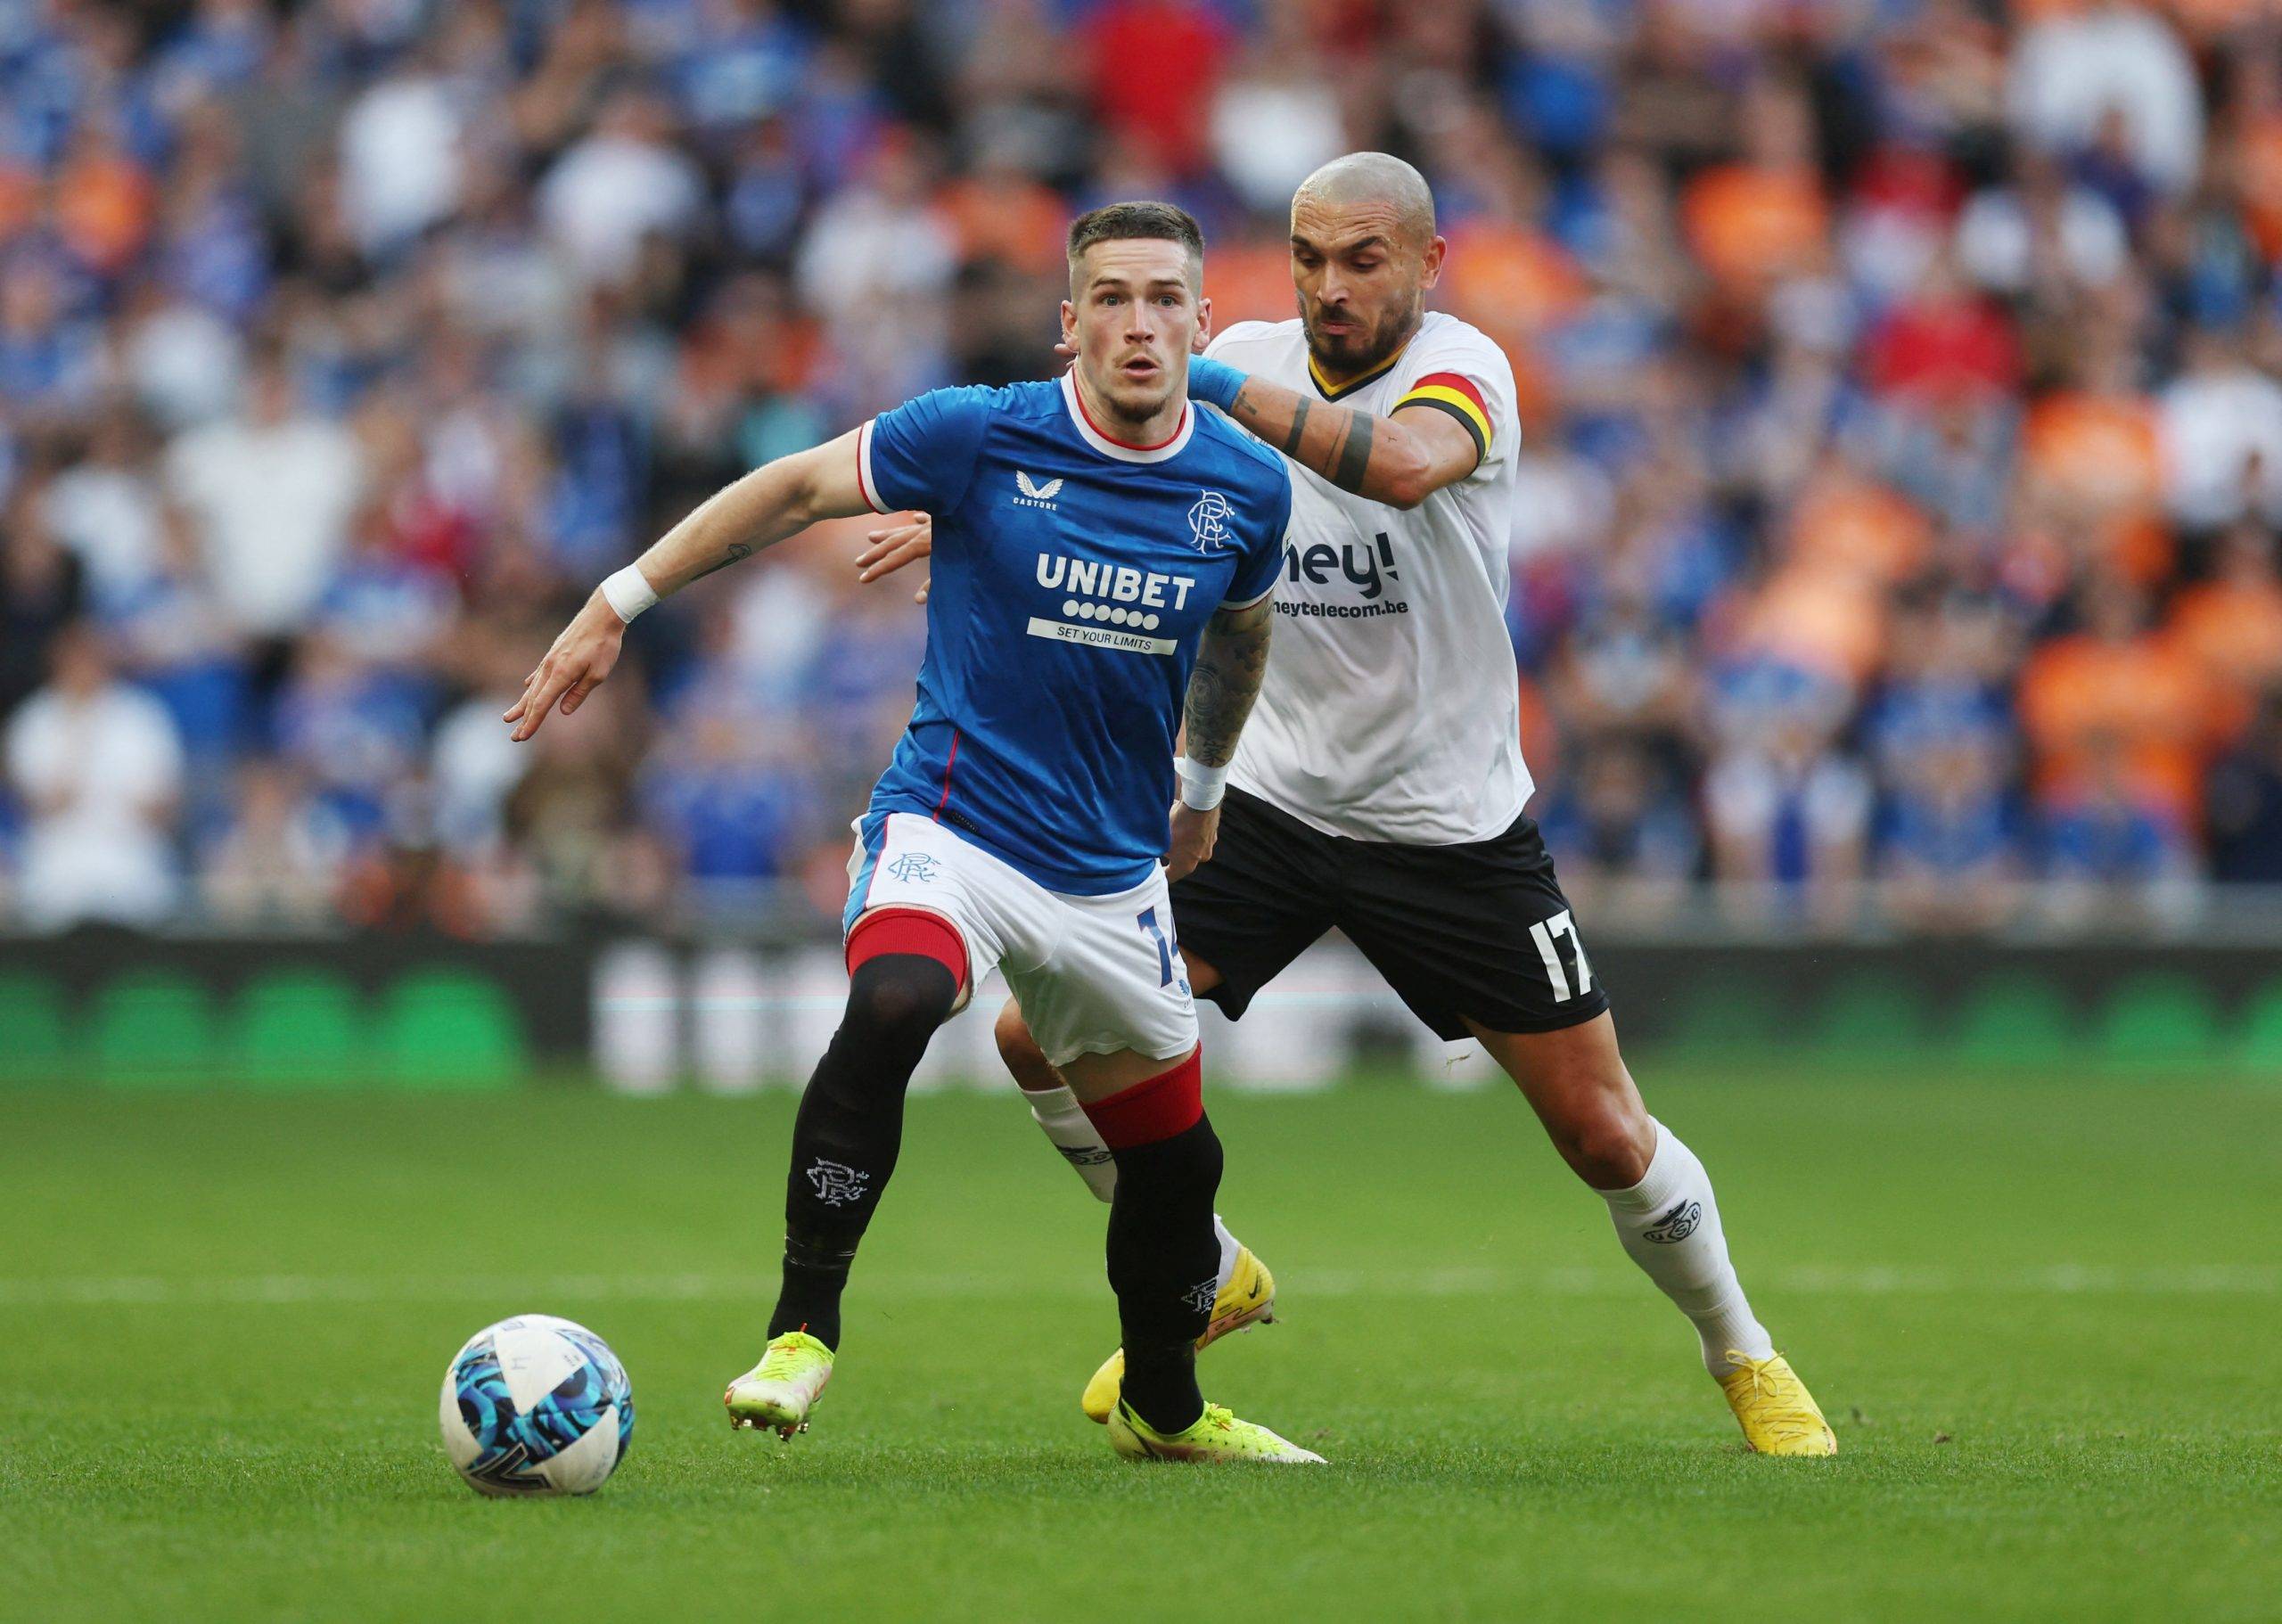 Rangers: Joshua Barrie sees signs that Ryan Kent could stay - Podcasts